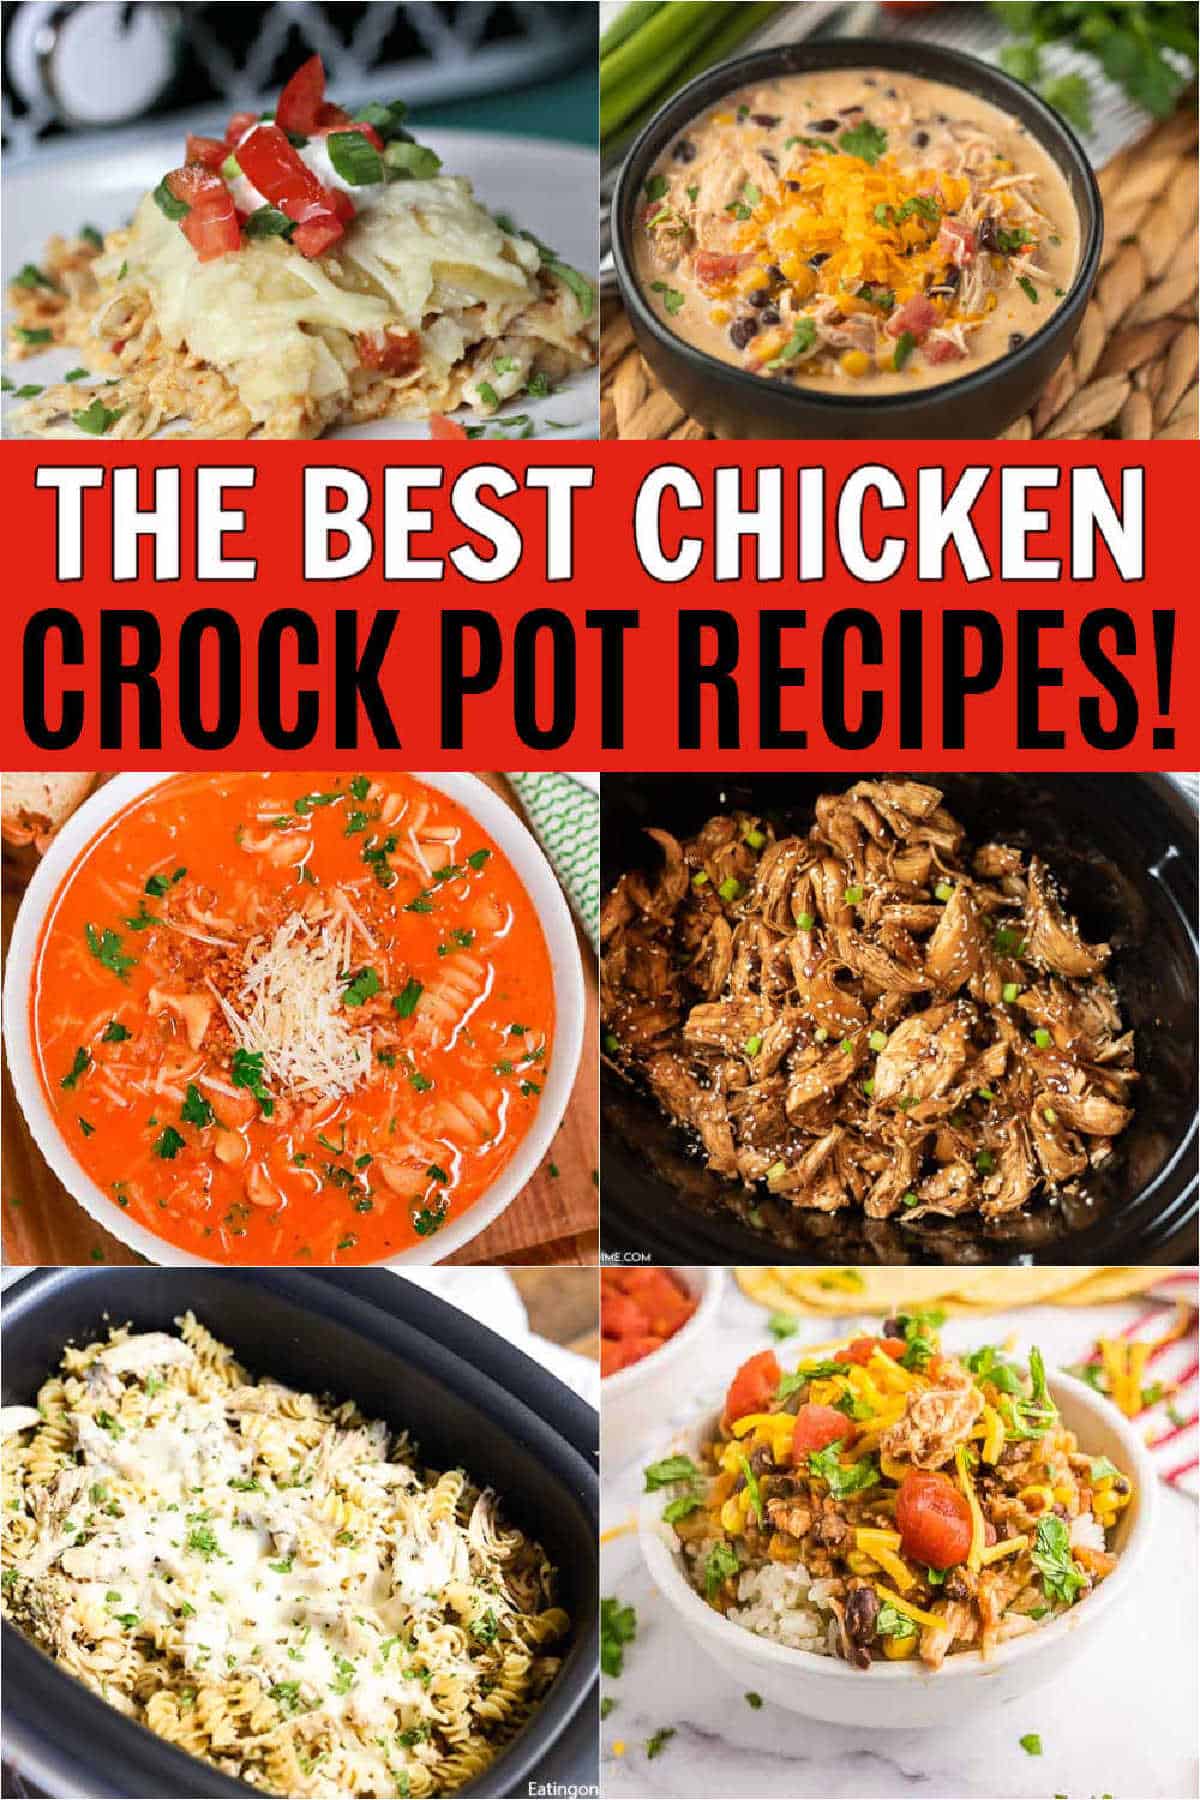 Slow Cooker chicken recipes will make dinner time easy and delicious. From soups and casseroles to Mexican food and more, try easy crock pot chicken recipes that are healthy too!  #eatingonadime #crockpotrecipes #slowcookerrecipes #chickenrecipes 
